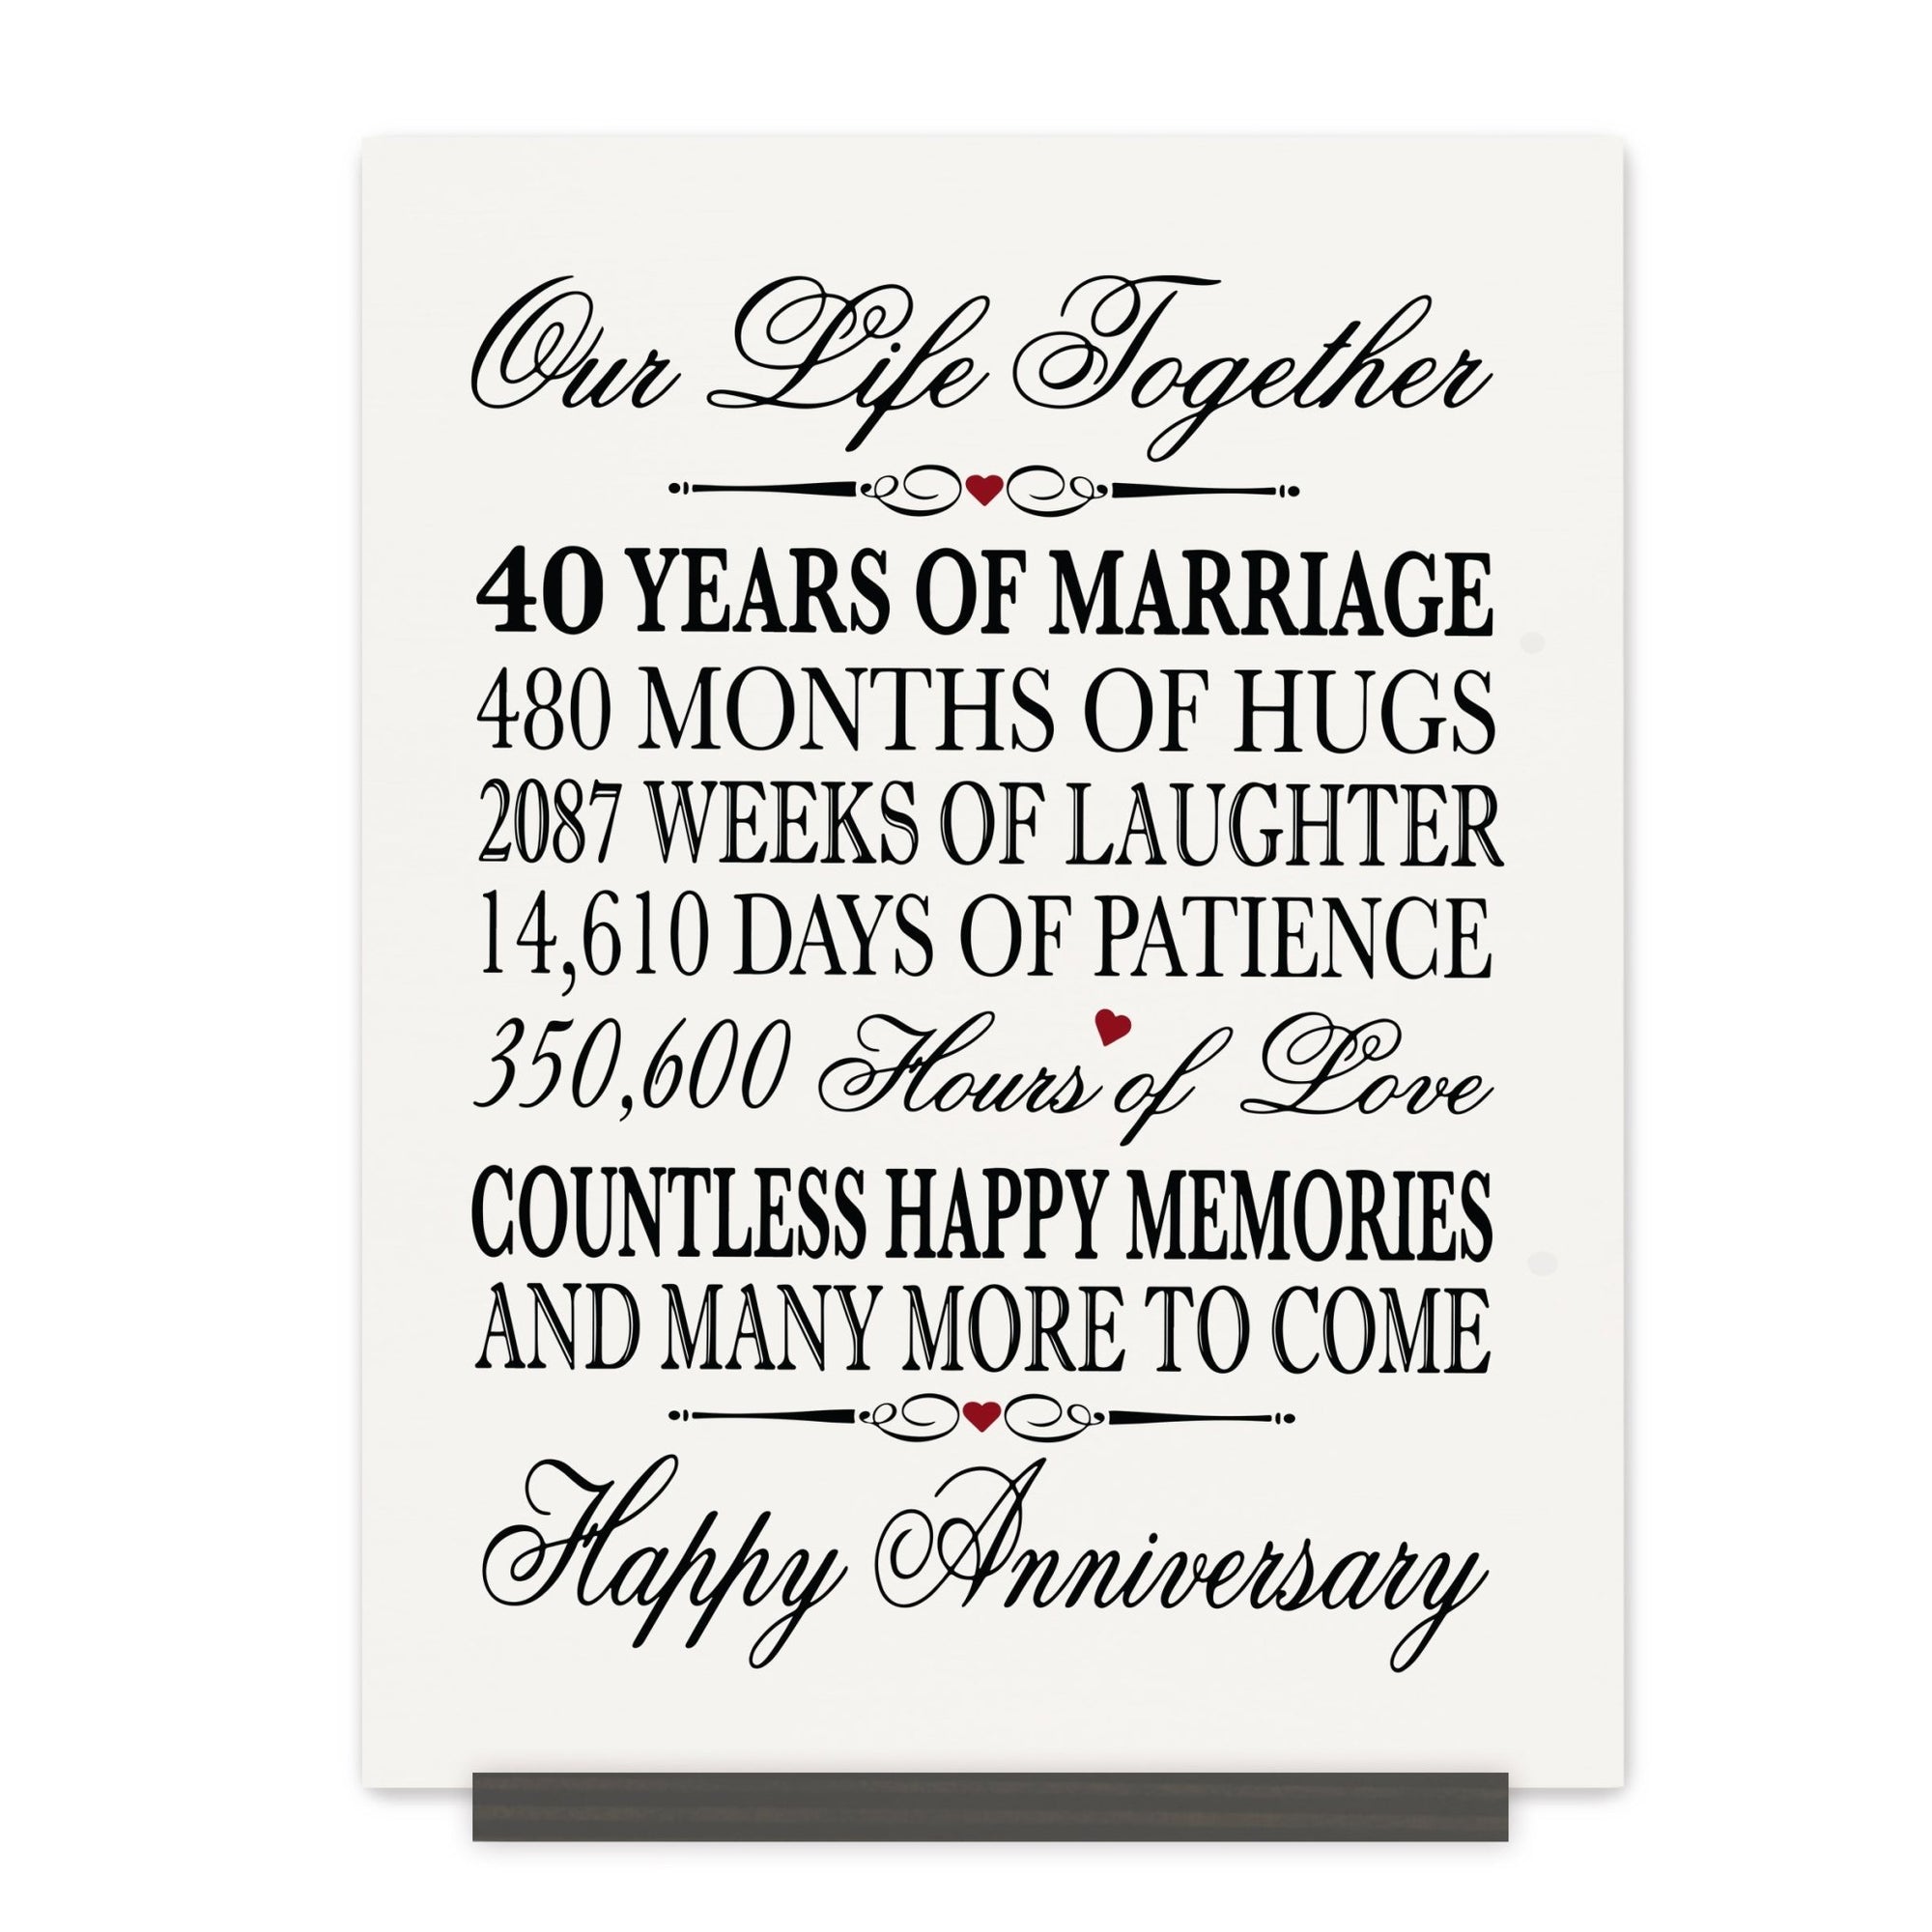 40th Wedding Anniversary Wall Plaque - Our Life Together - LifeSong Milestones